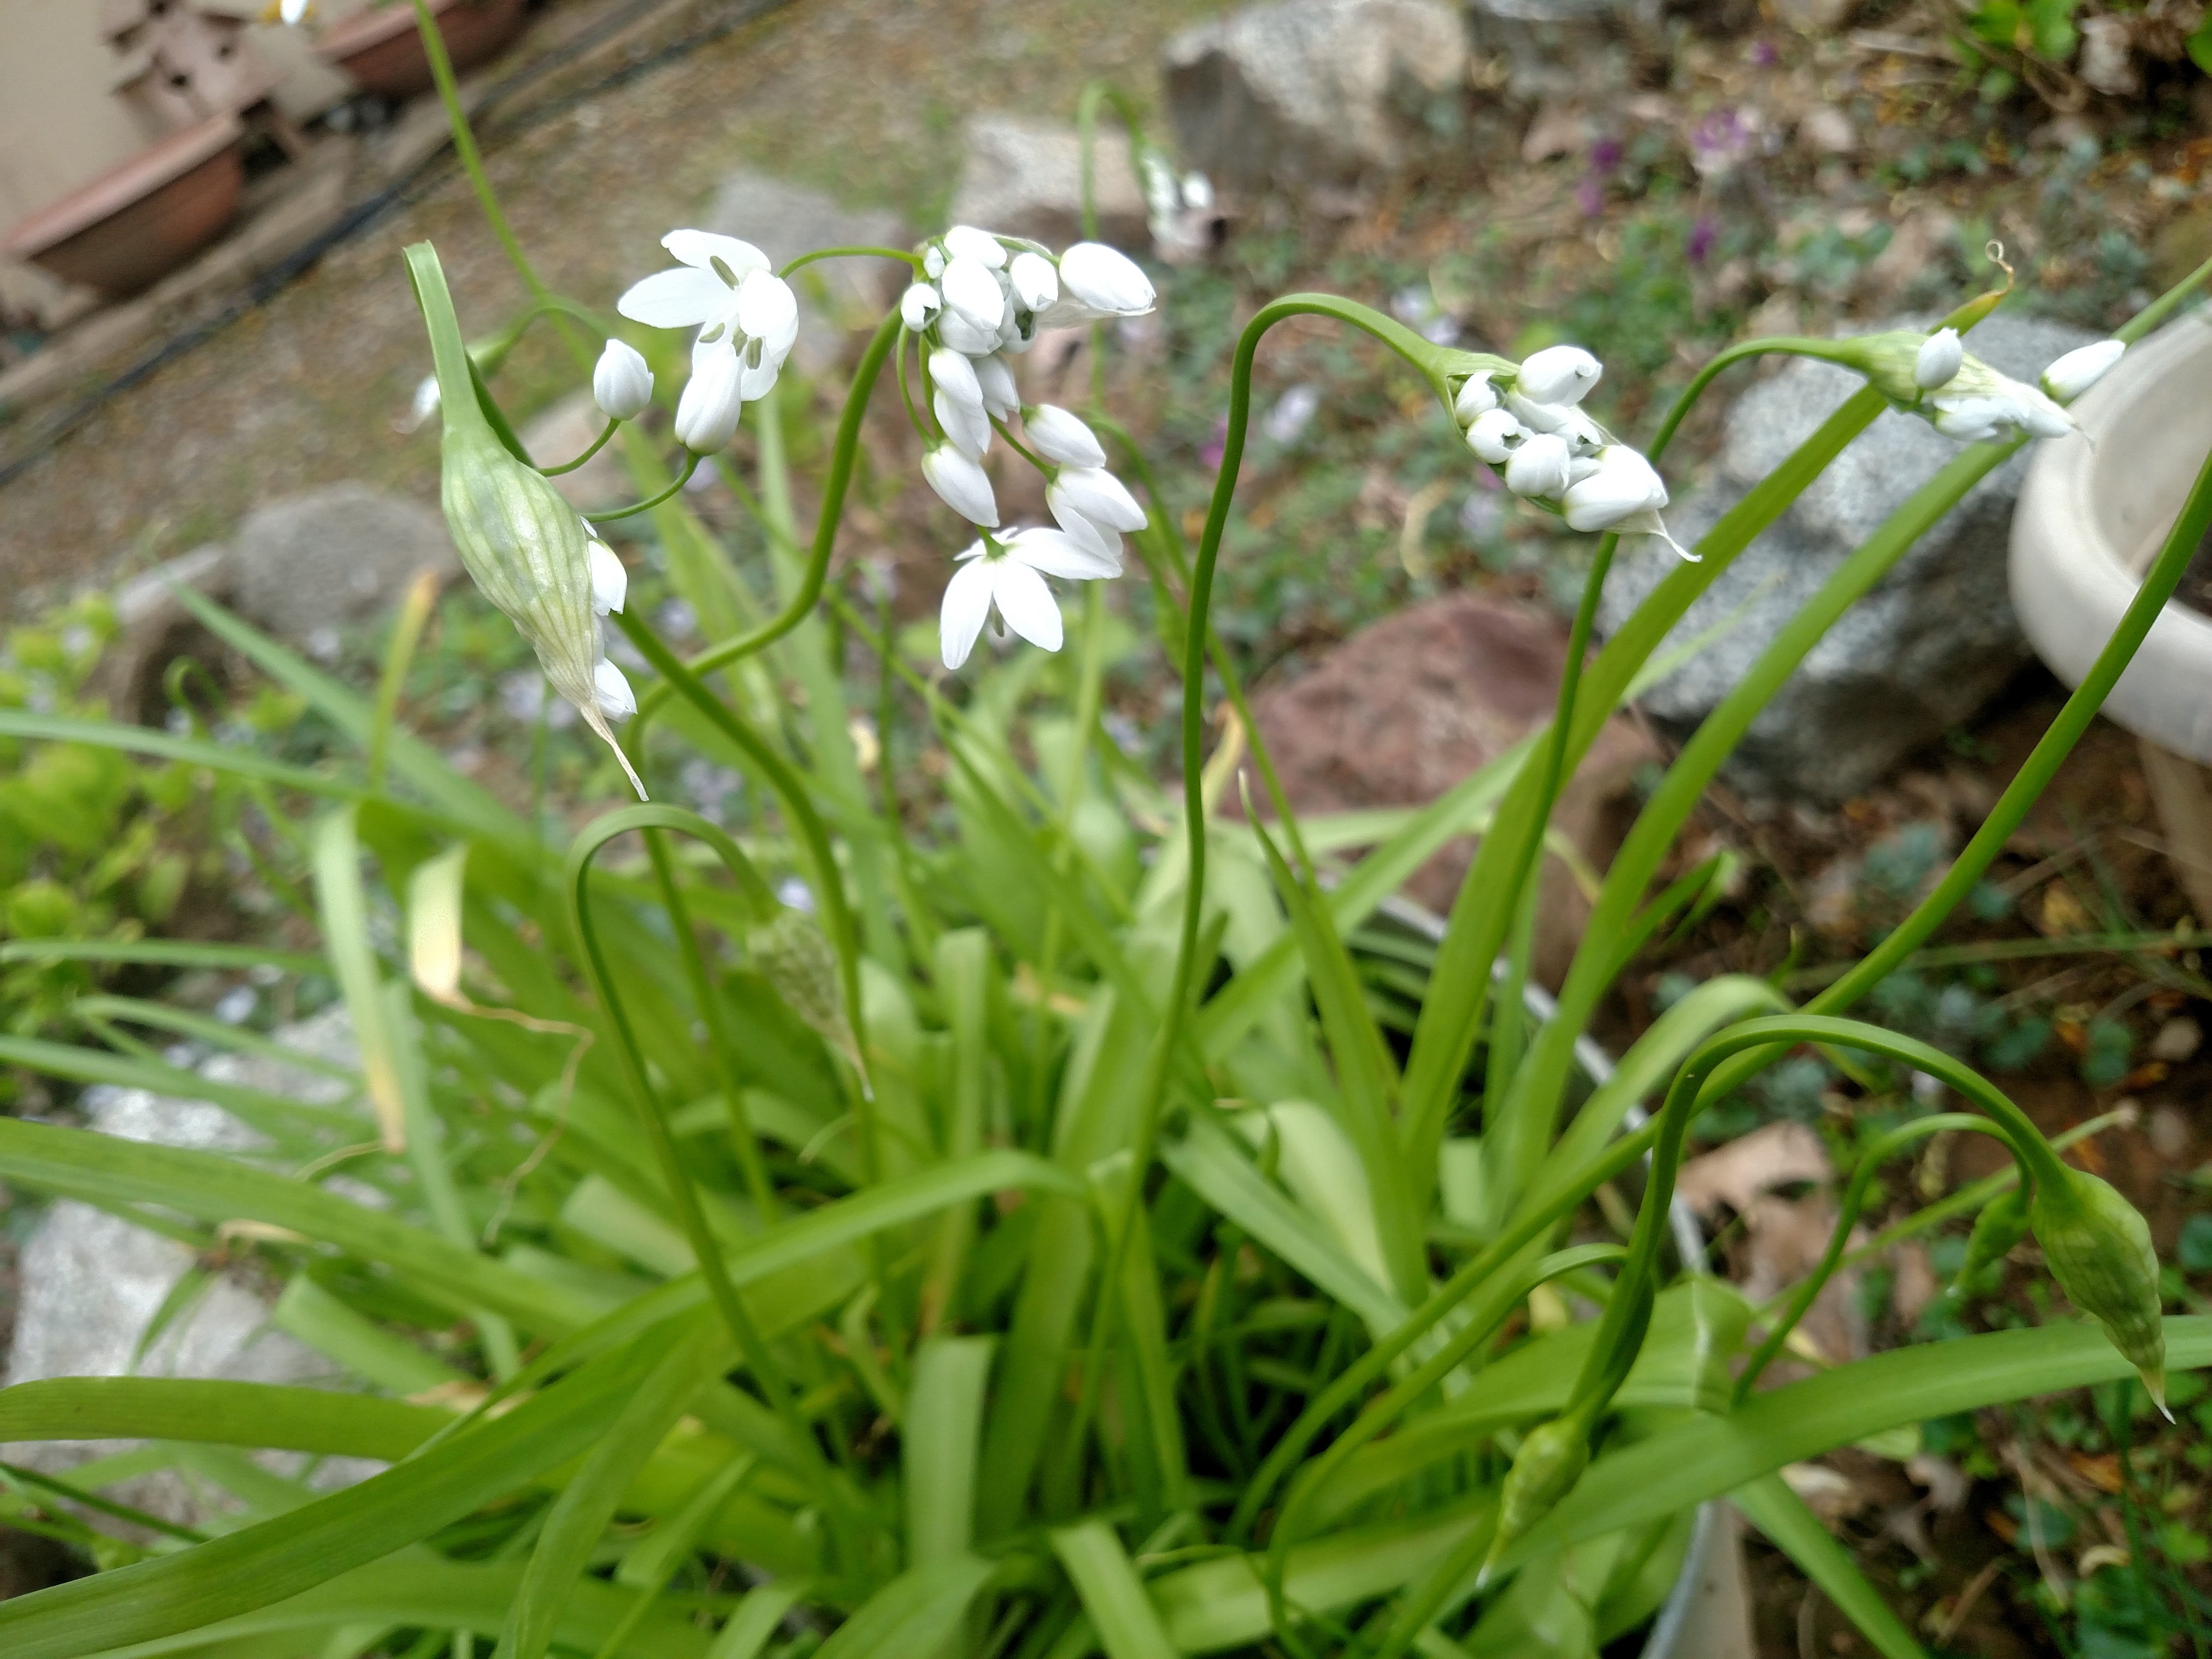 White flower with grass-like foliage - Ask an Expert